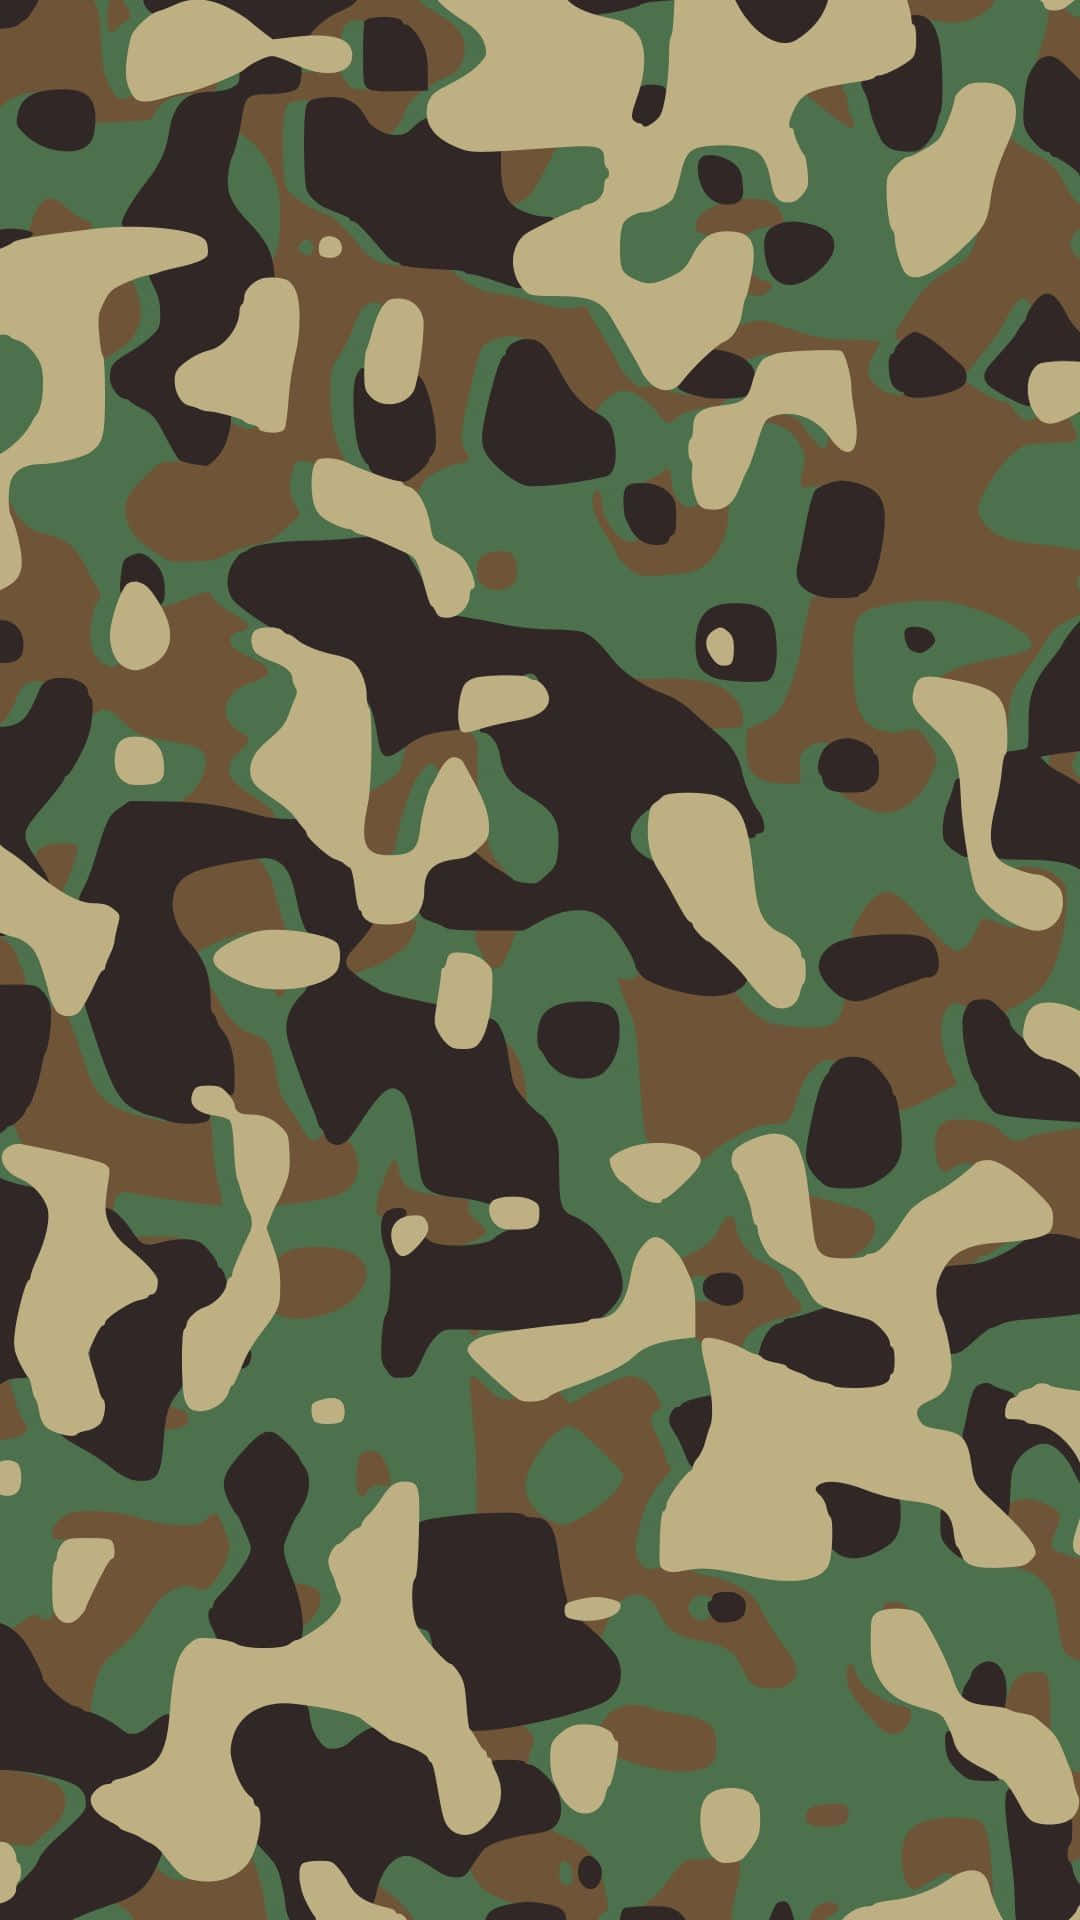 Show off your wild side with this bright green camo print. Wallpaper